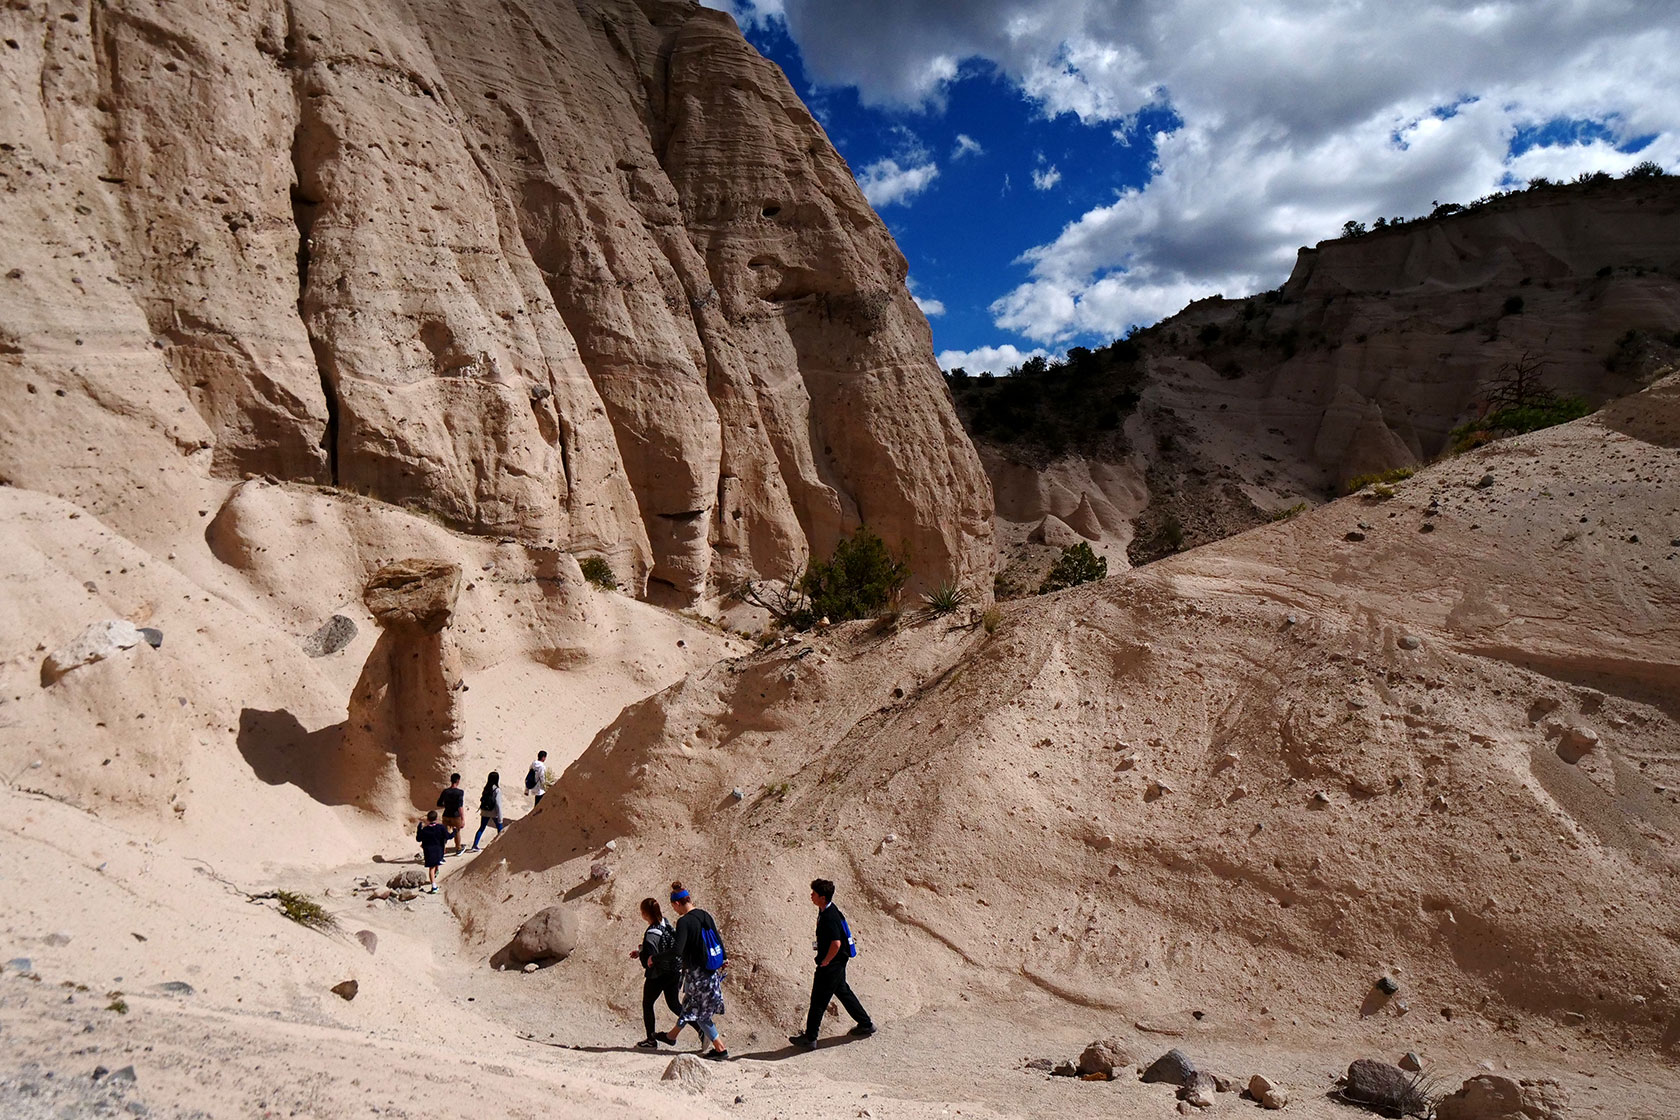 Photo shows a small group of people hiking among tall, pastel orange rock formations against a blue sky with some puffy white clouds